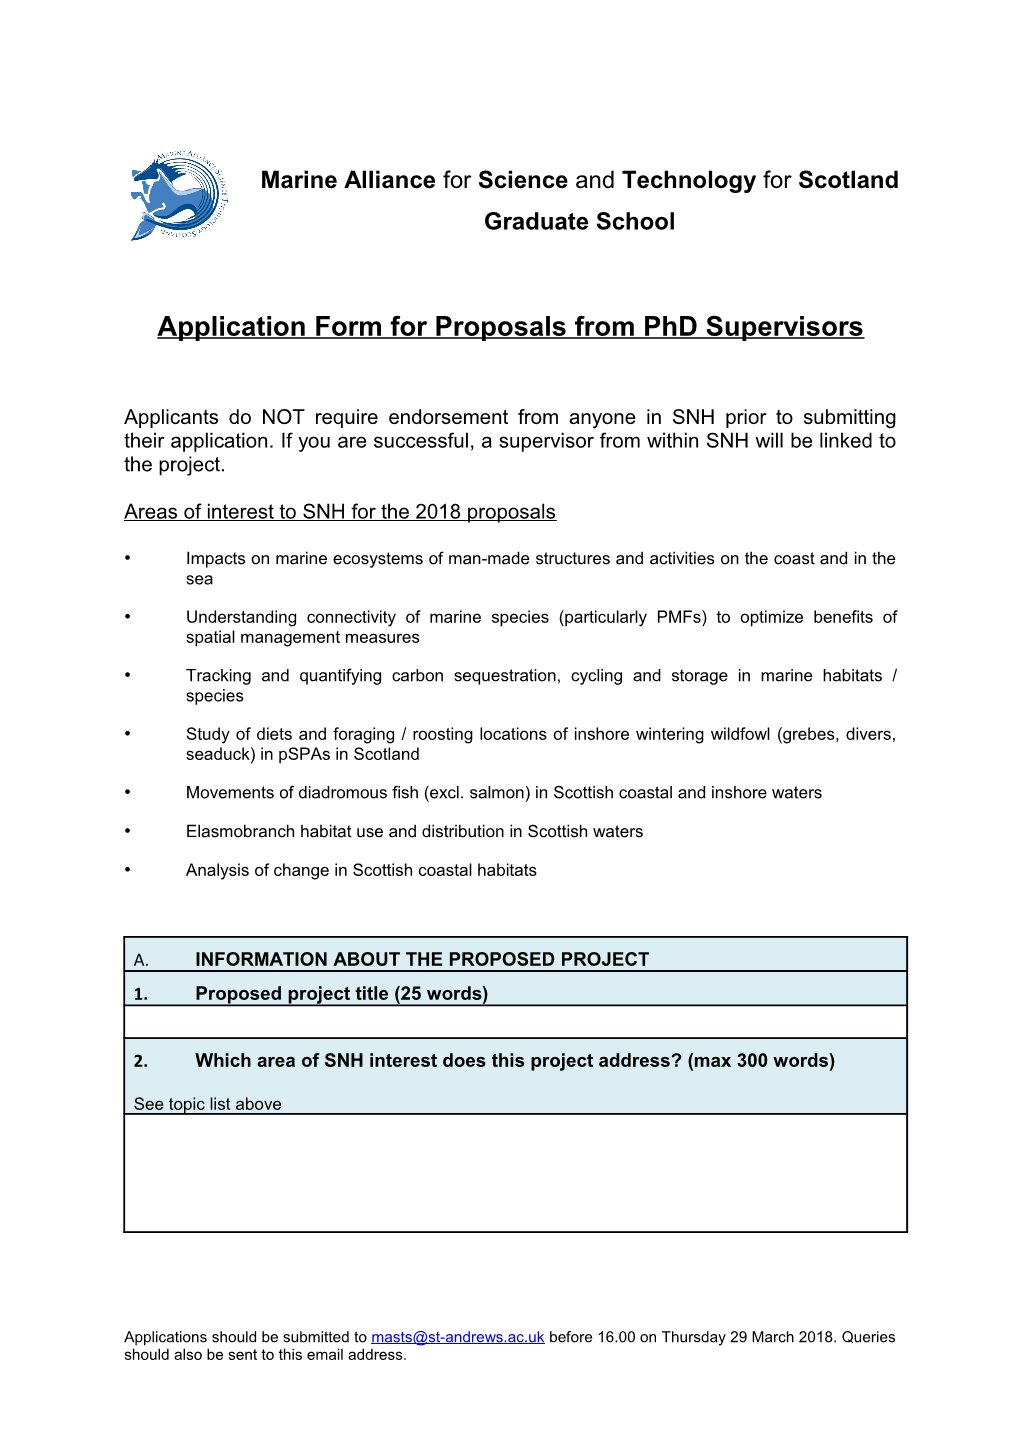 Application Form for Proposals from Phd Supervisors